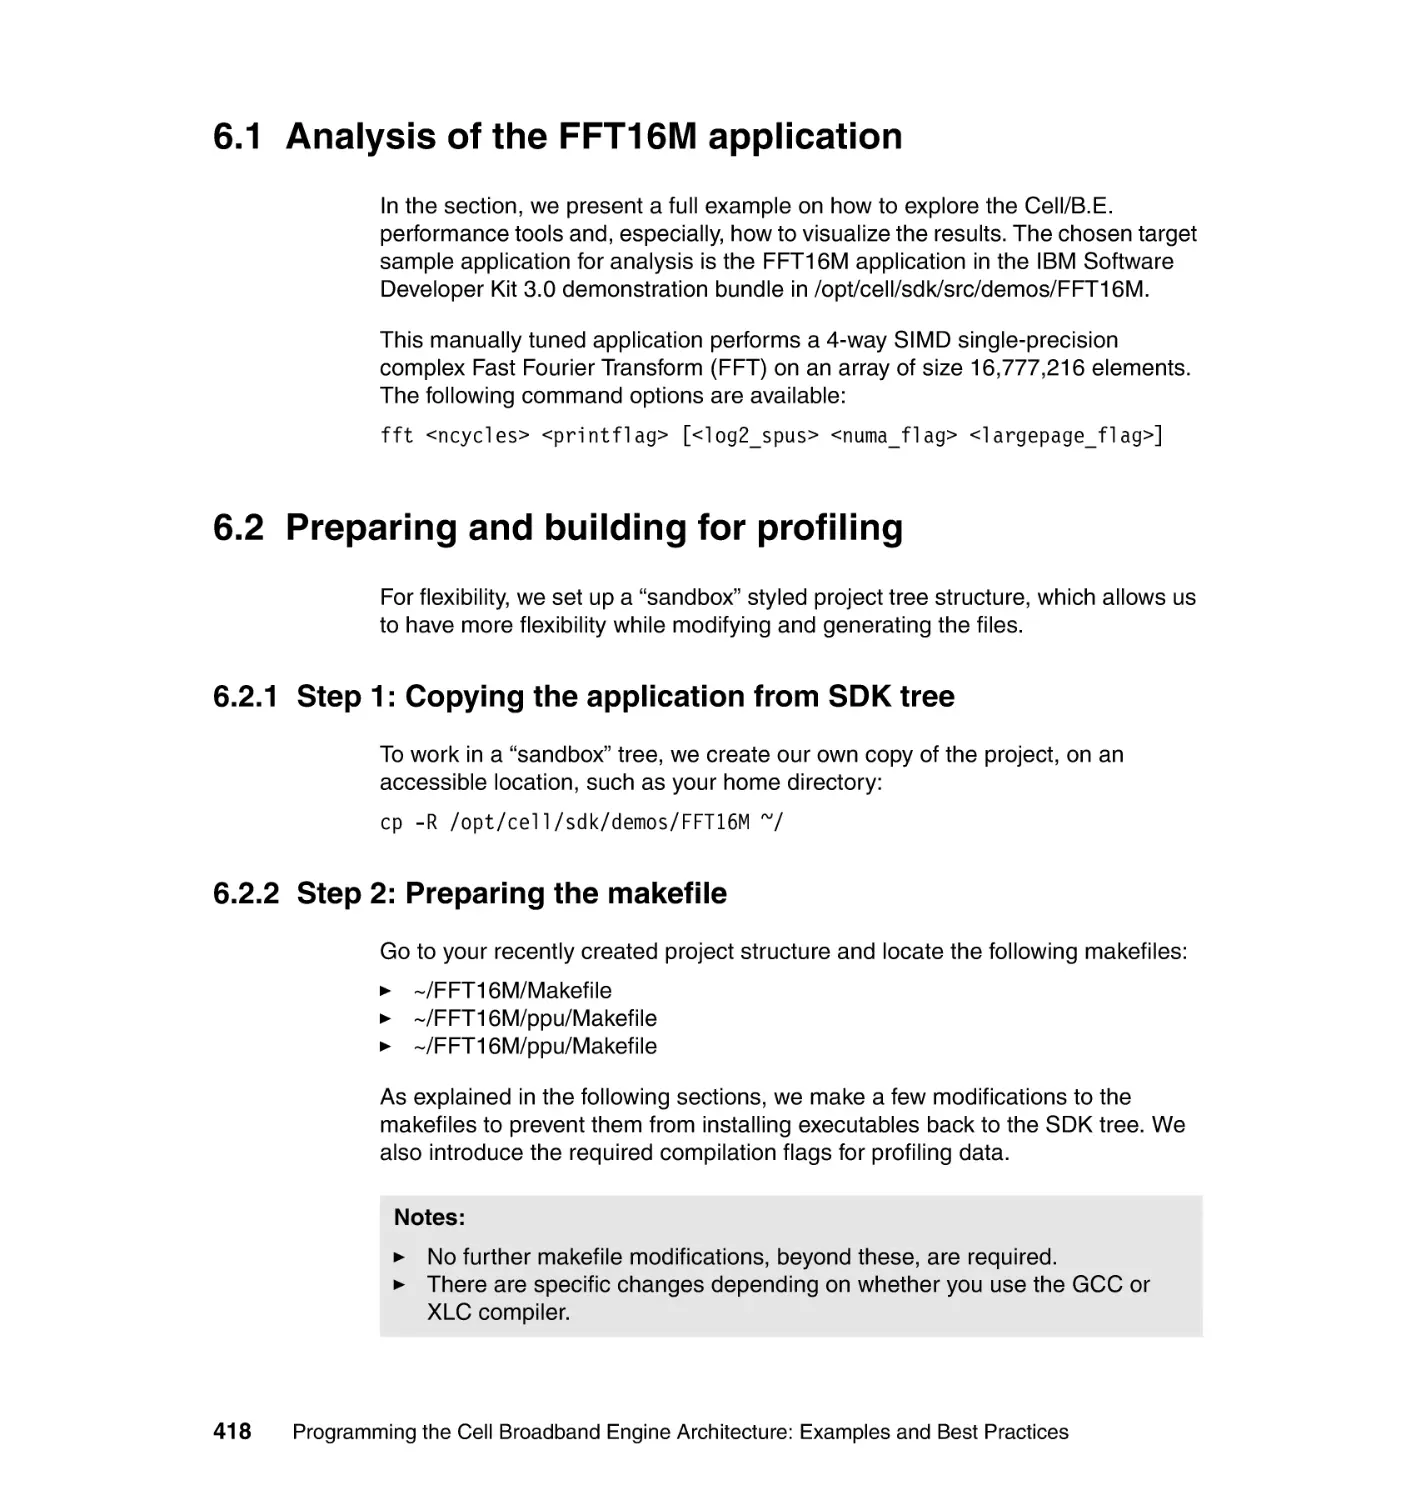 6.1 Analysis of the FFT16M application
6.2 Preparing and building for profiling
6.2.1 Step 1
6.2.2 Step 2